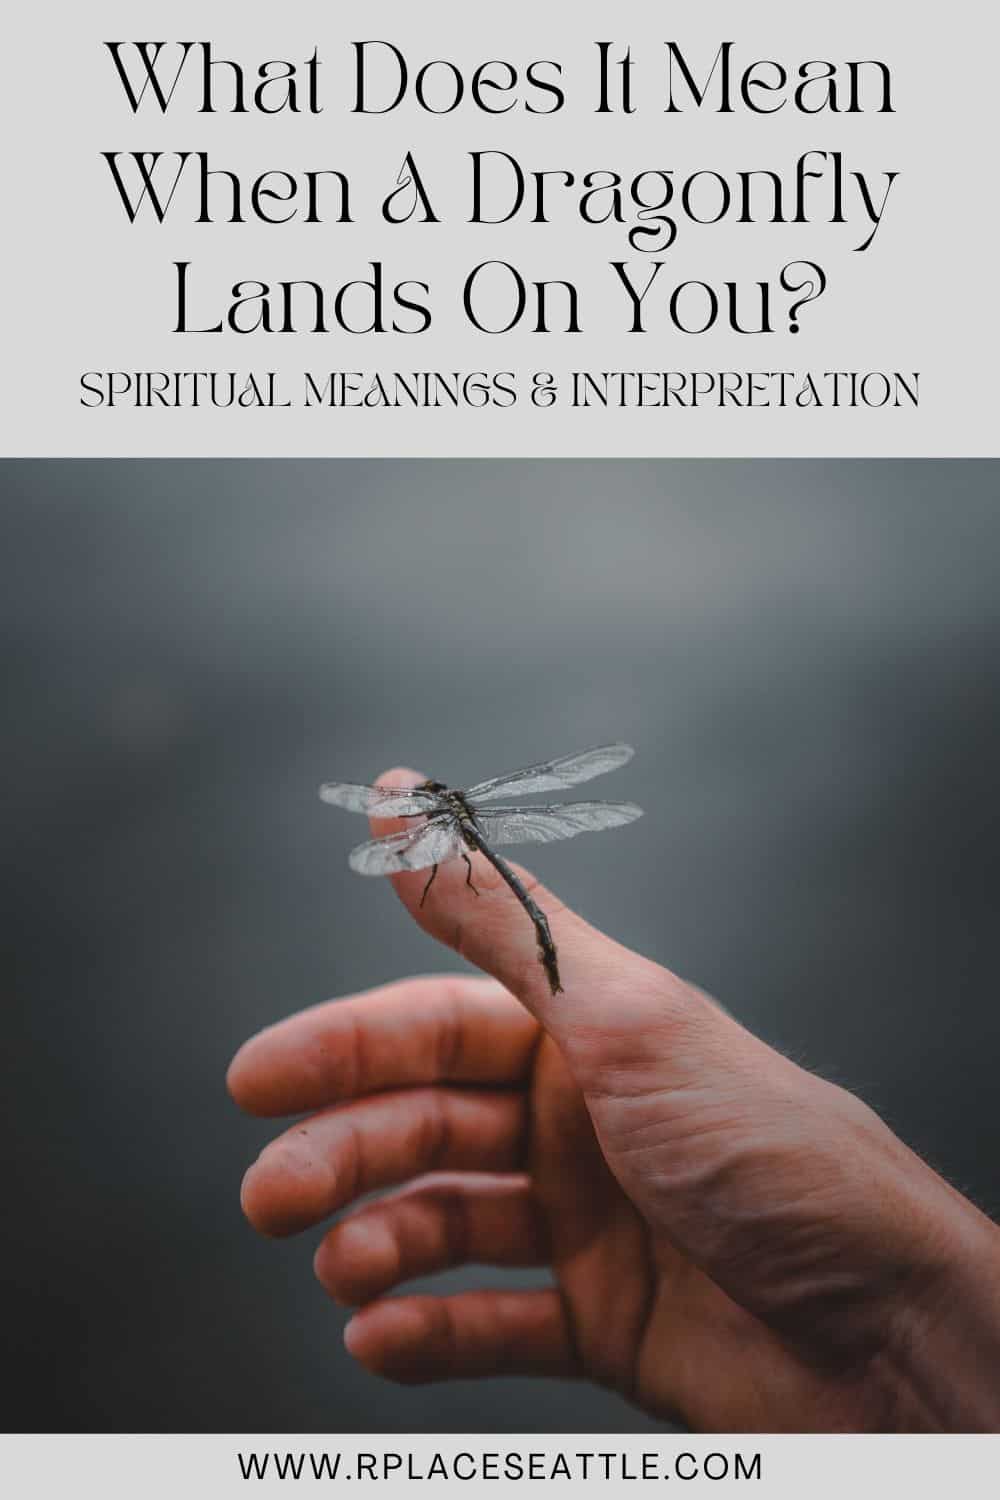 What Does It Mean When A Dragonfly Lands On You (Spiritual Meanings & Interpretation)